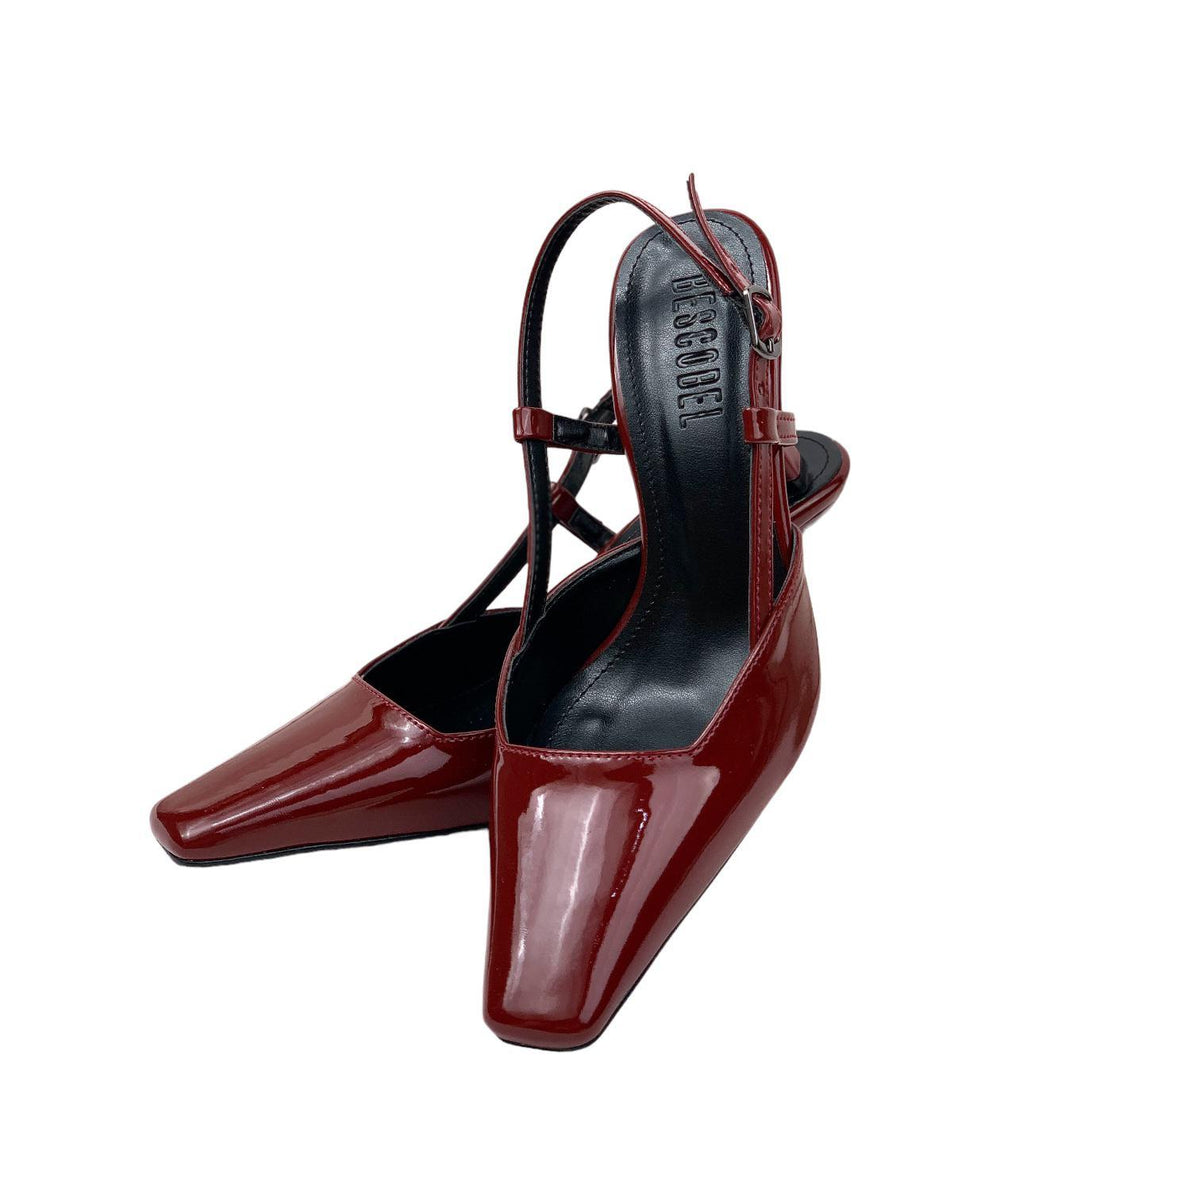 Women's Yojd Burgundy Patent Leather Heeled Open Back Shoes 8 CM - STREETMODE™